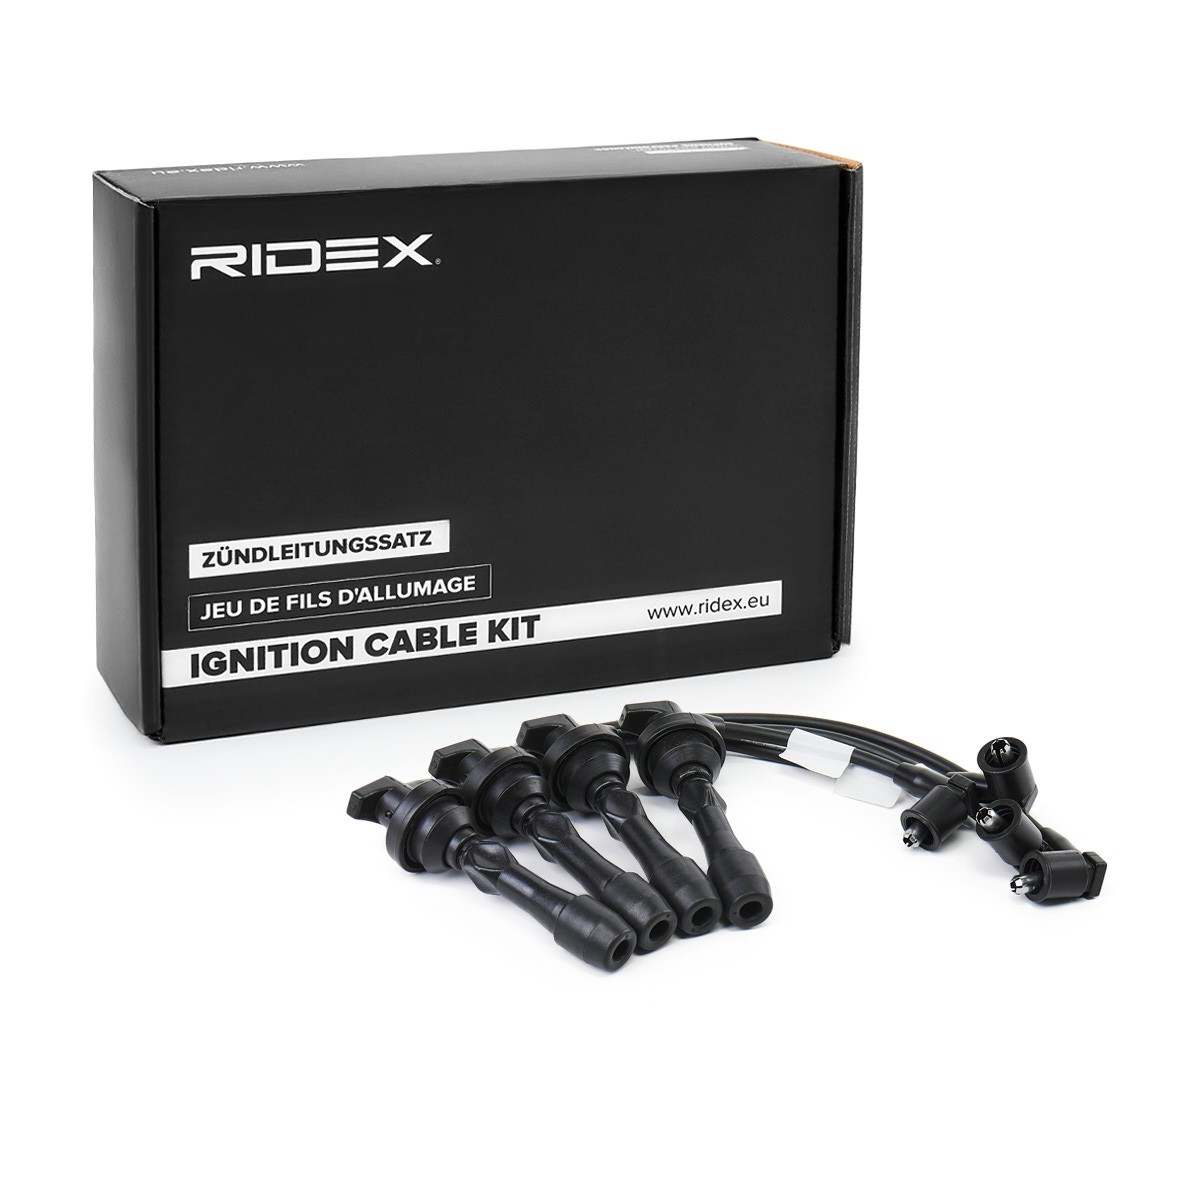 RIDEX 685I0218 Ignition Cable Kit